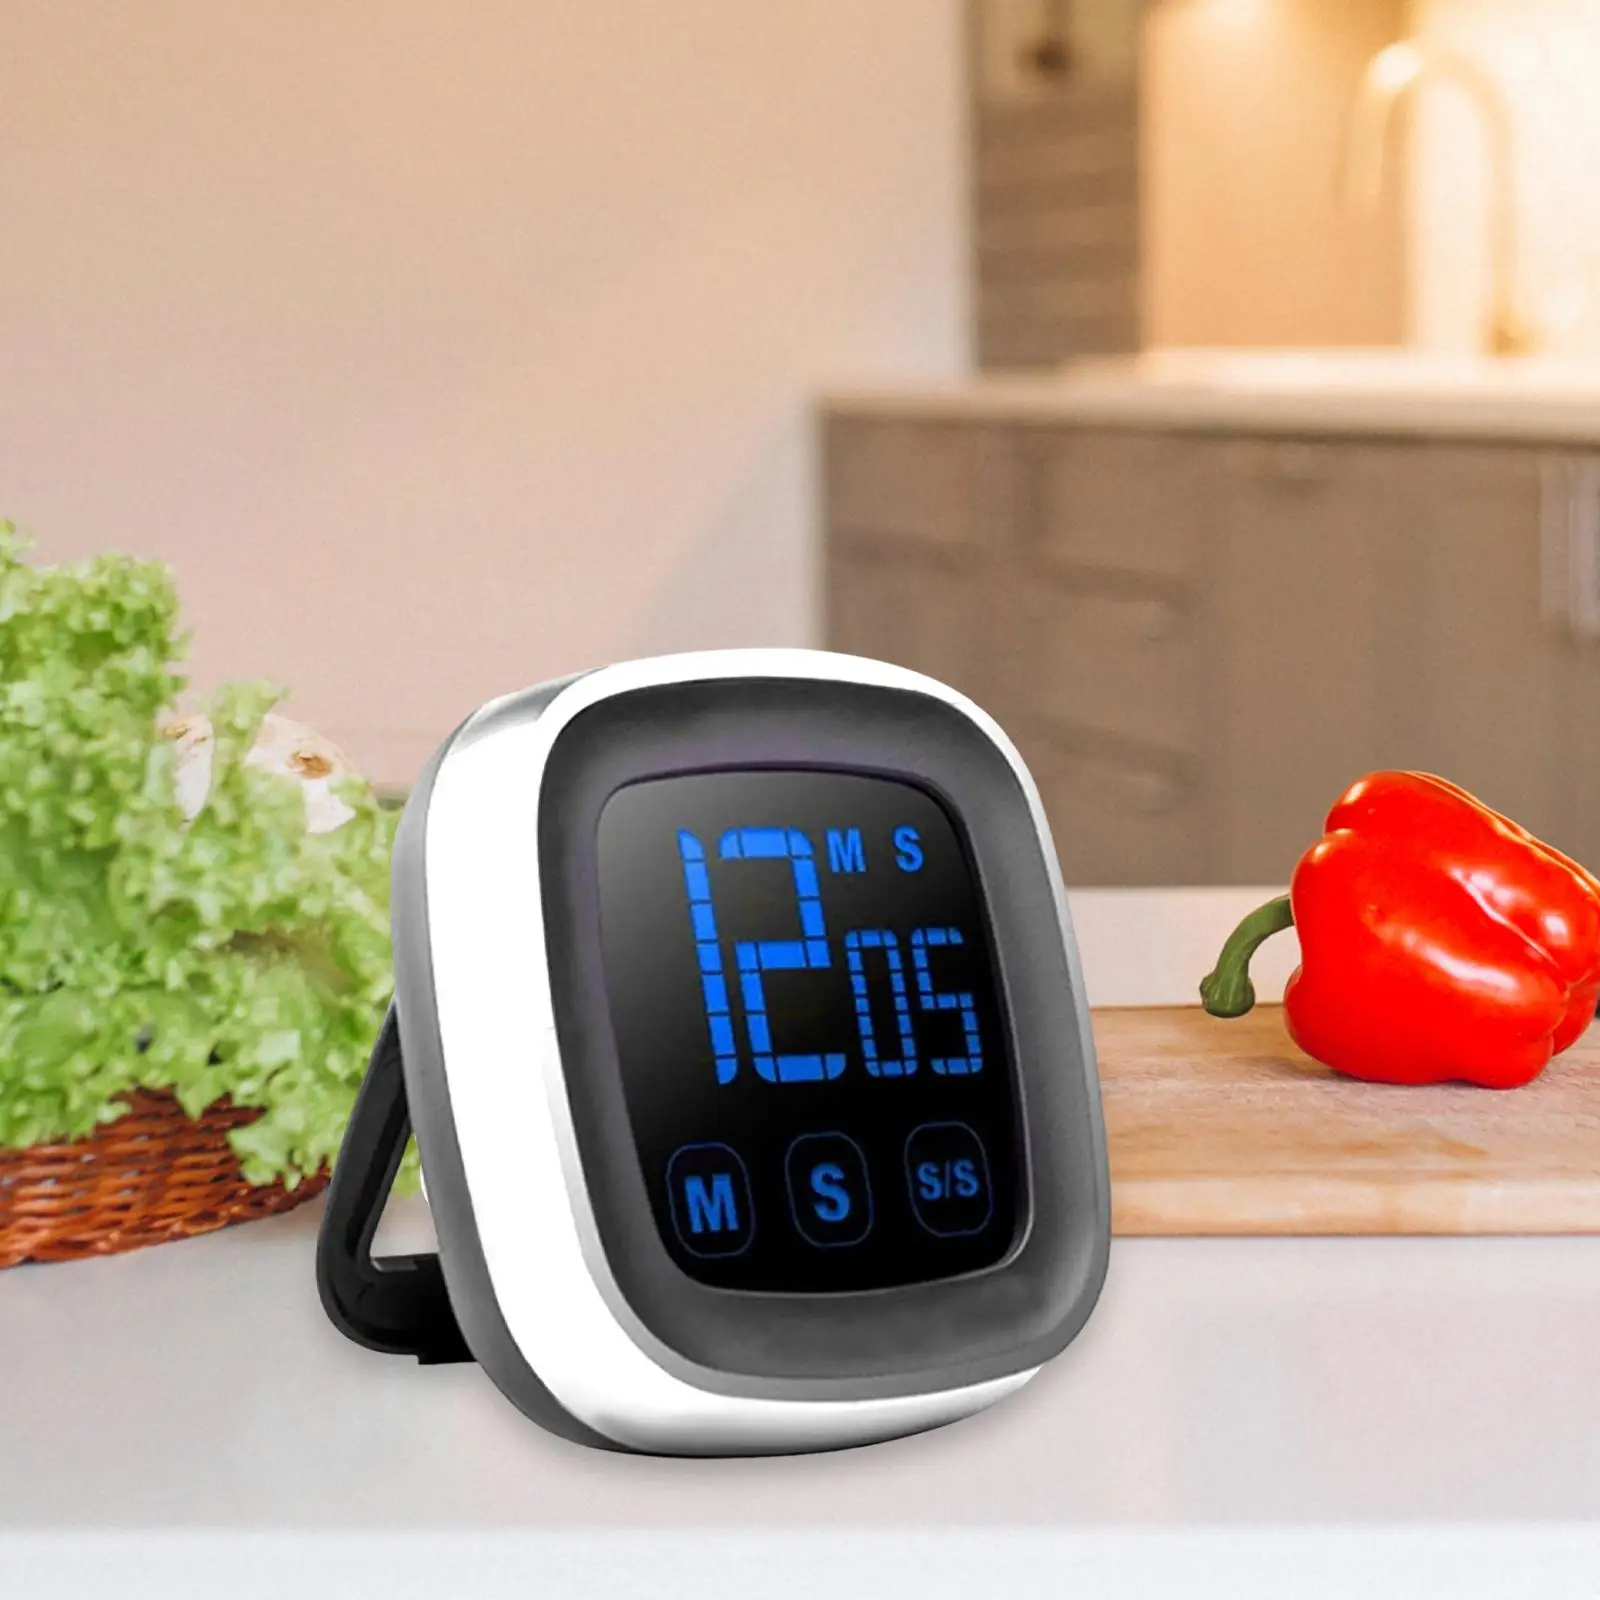 LED Display Digital Timer Count Down up Teachers Kids Large Clearly Screen Clock Loud for Fitness Cooking Study